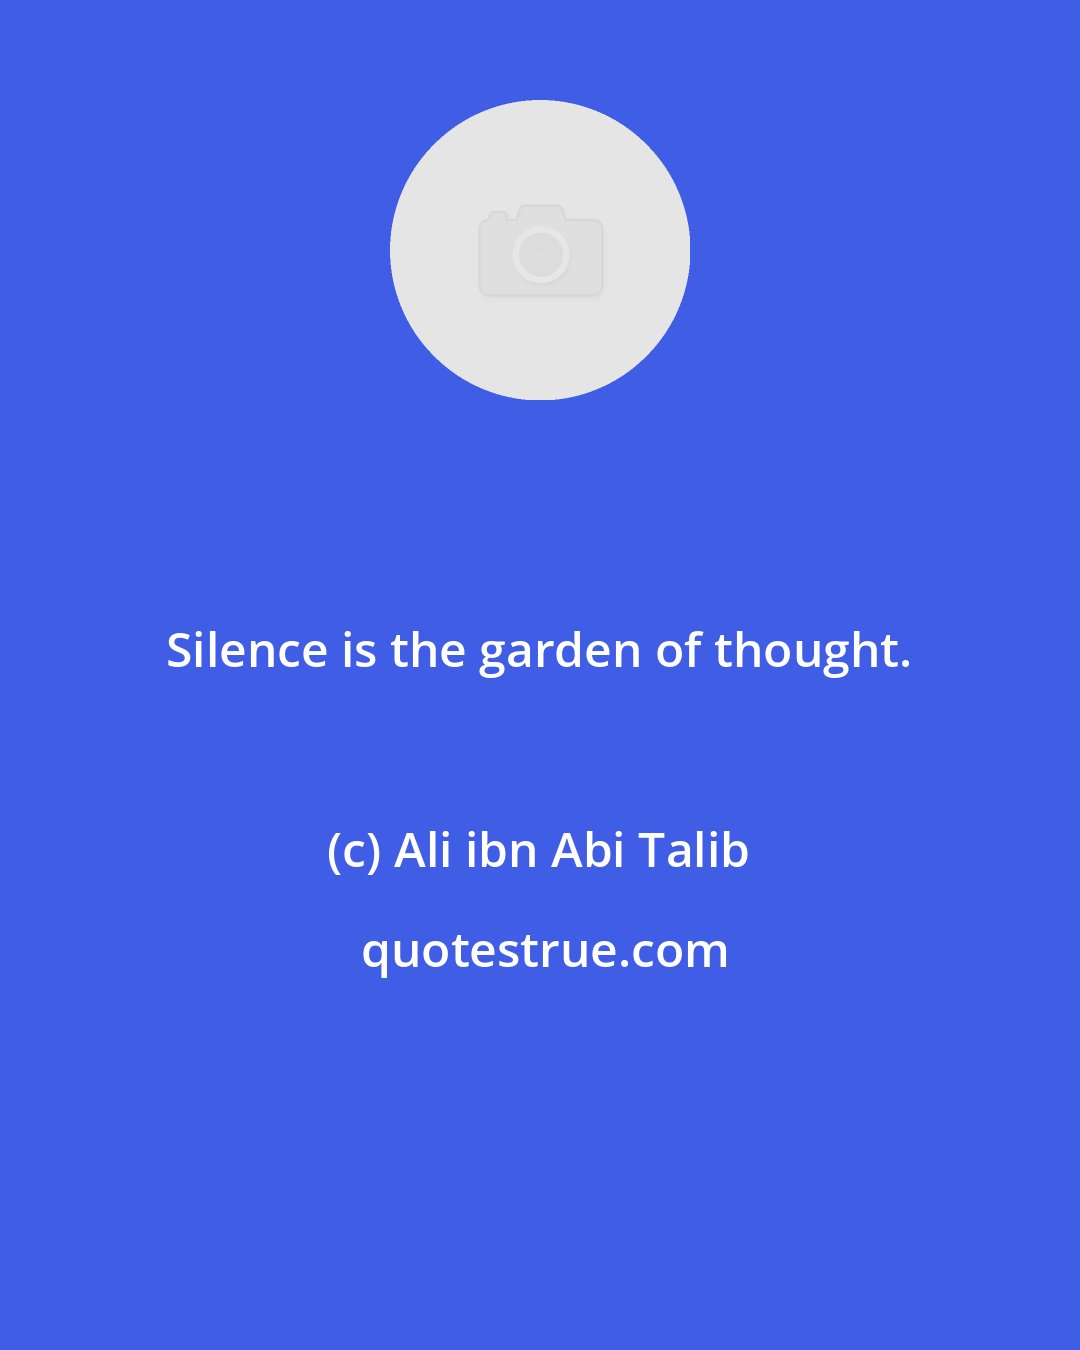 Ali ibn Abi Talib: Silence is the garden of thought.